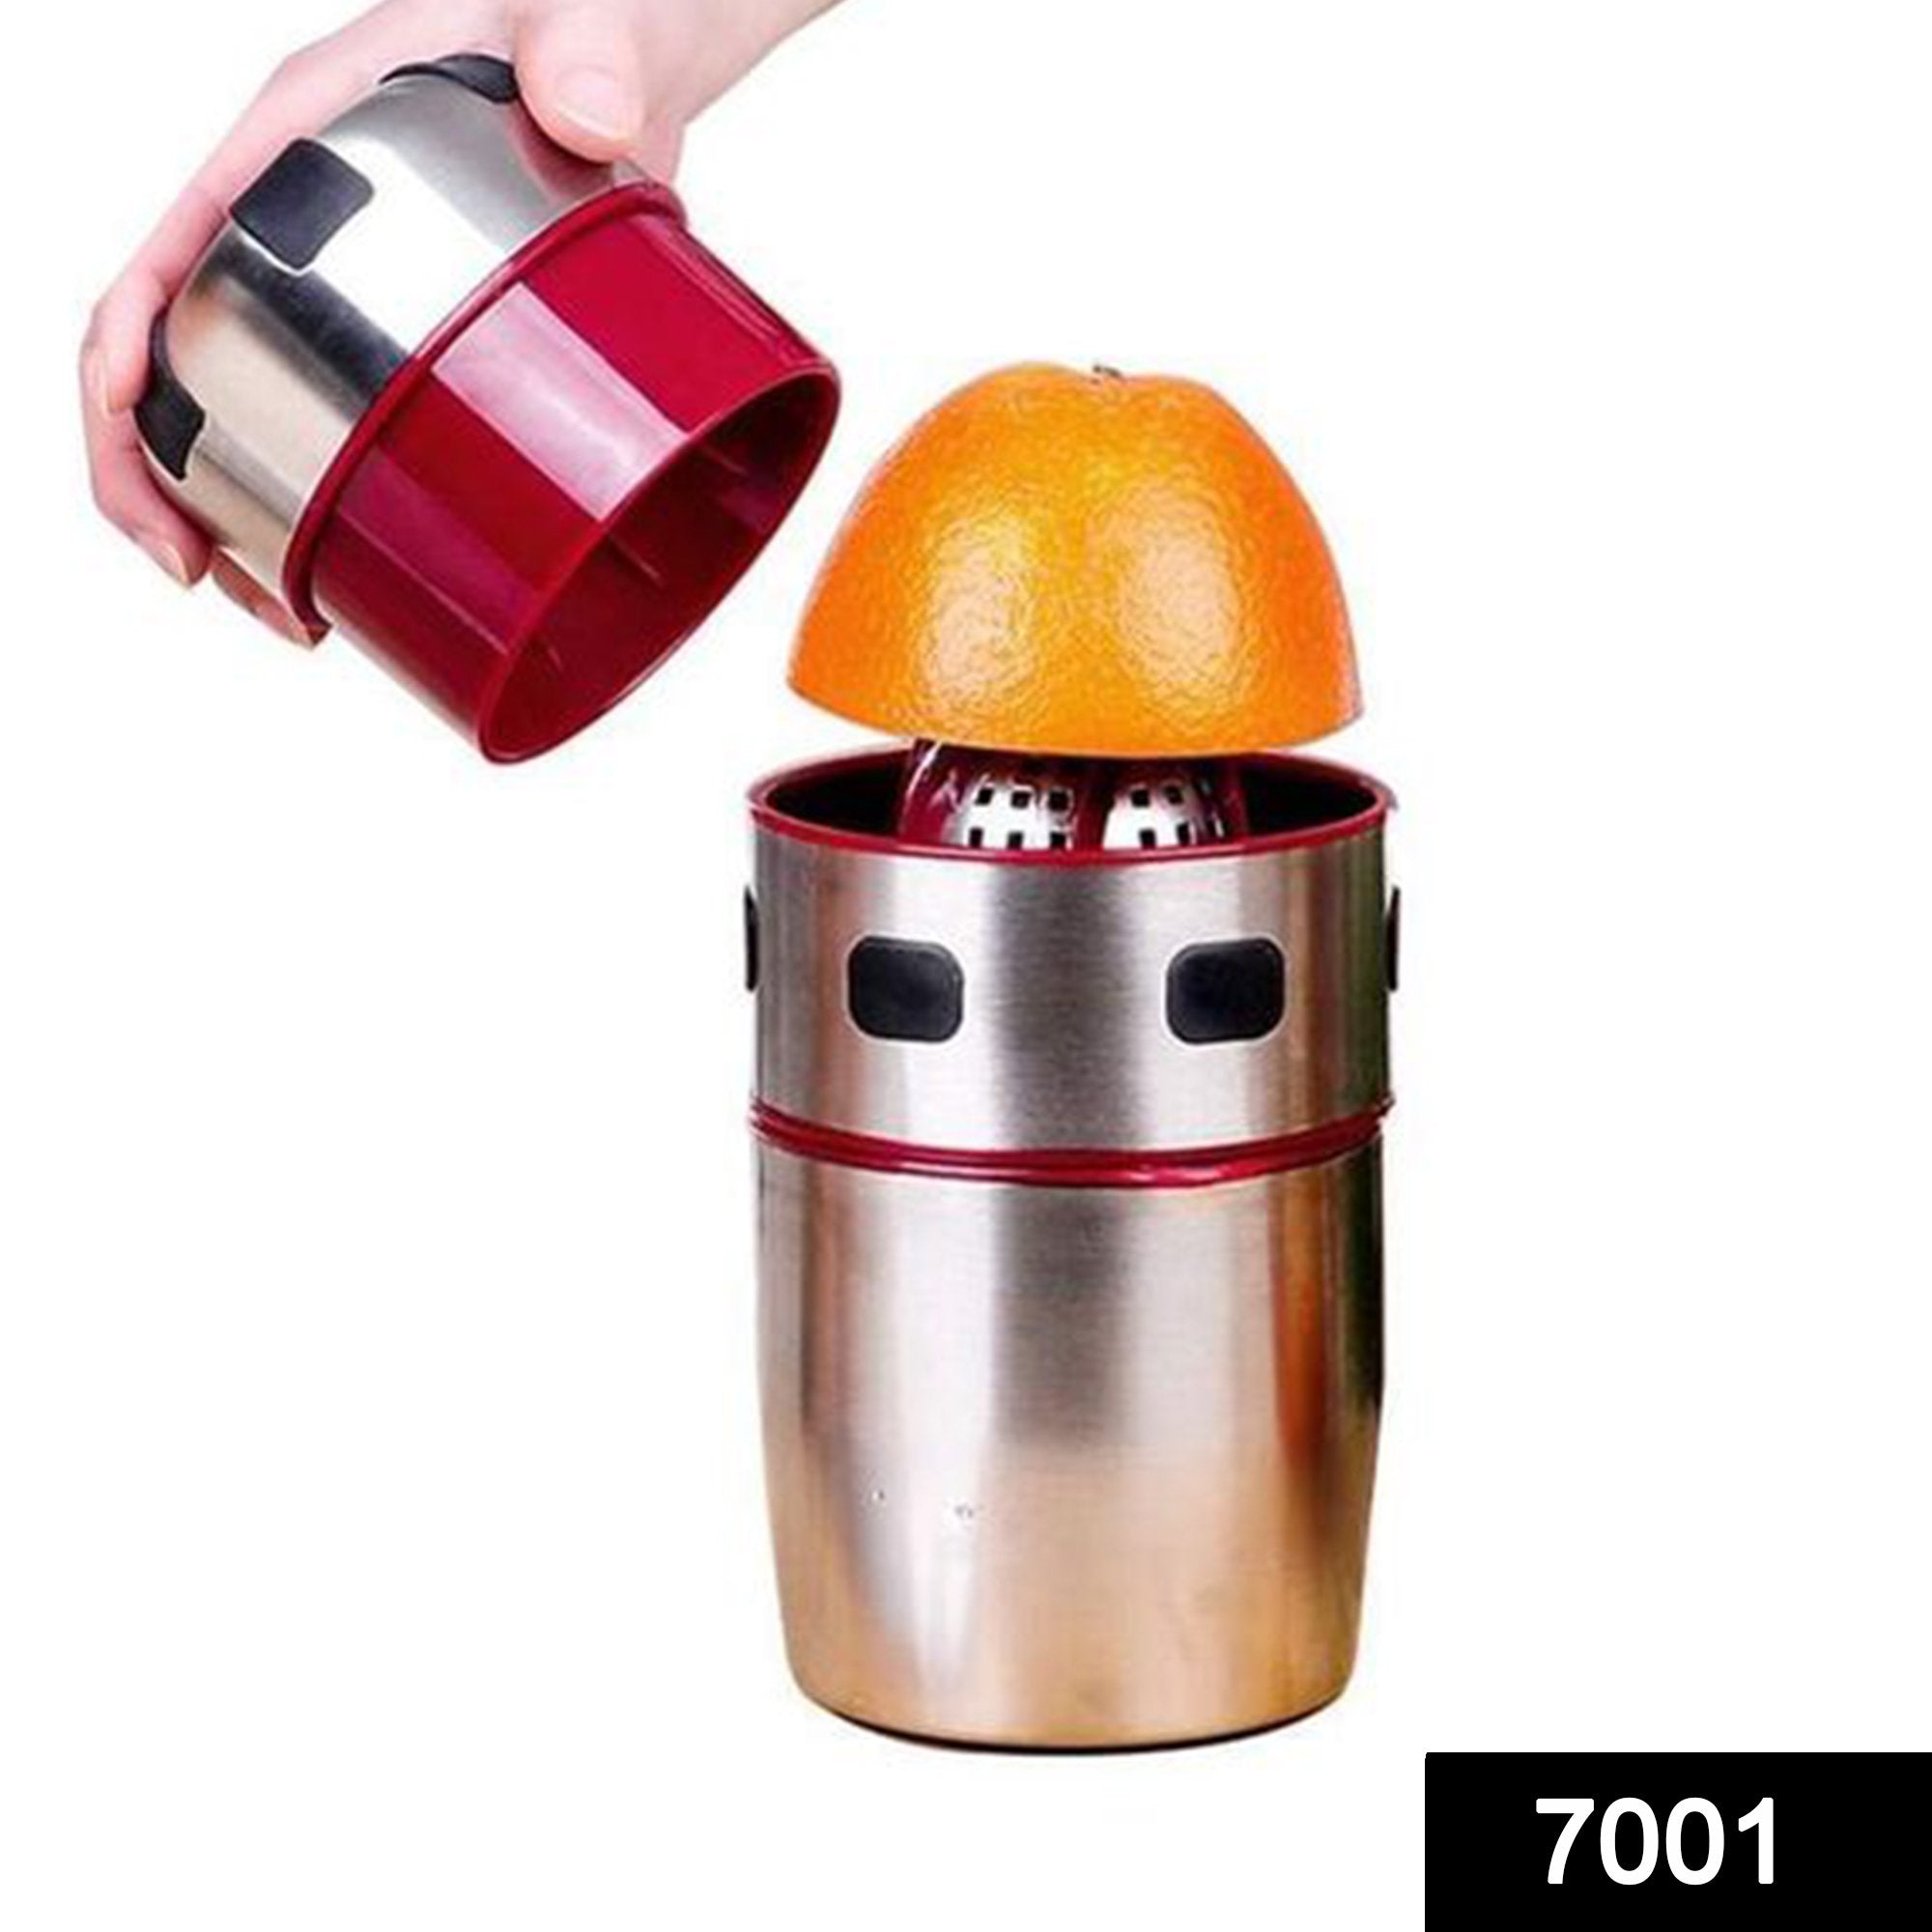 7001 manual hand portable juicer with strainer and container